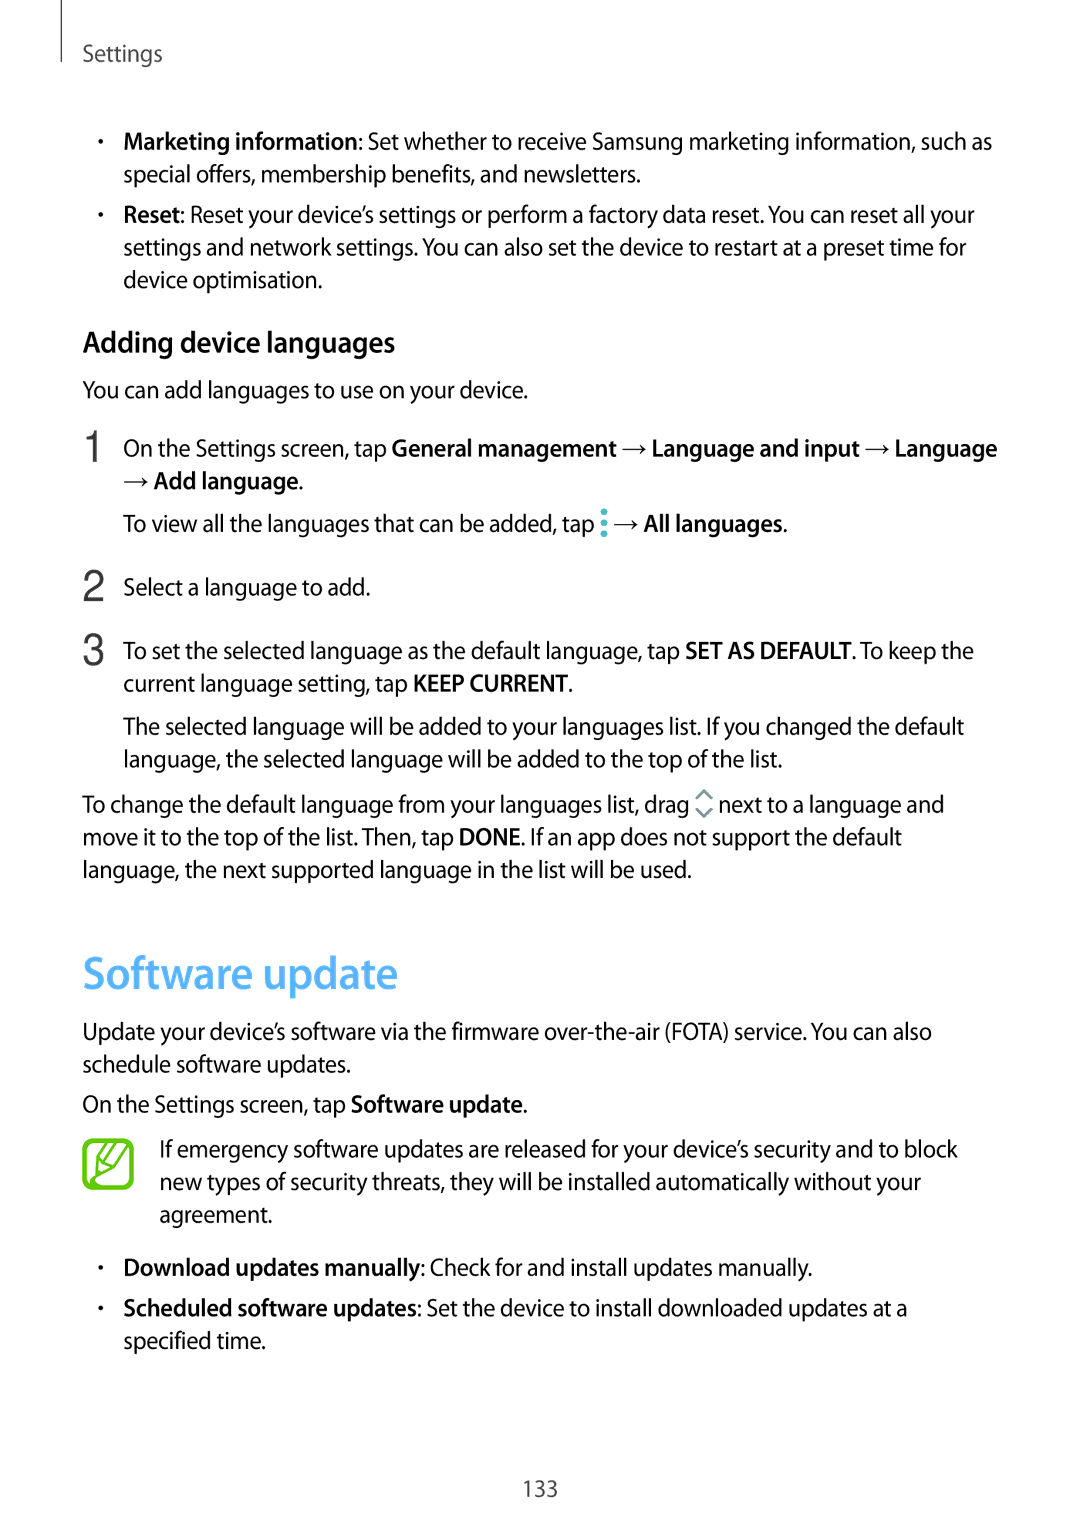 Samsung SM-T390NZKAEUR manual Software update, Adding device languages, You can add languages to use on your device 